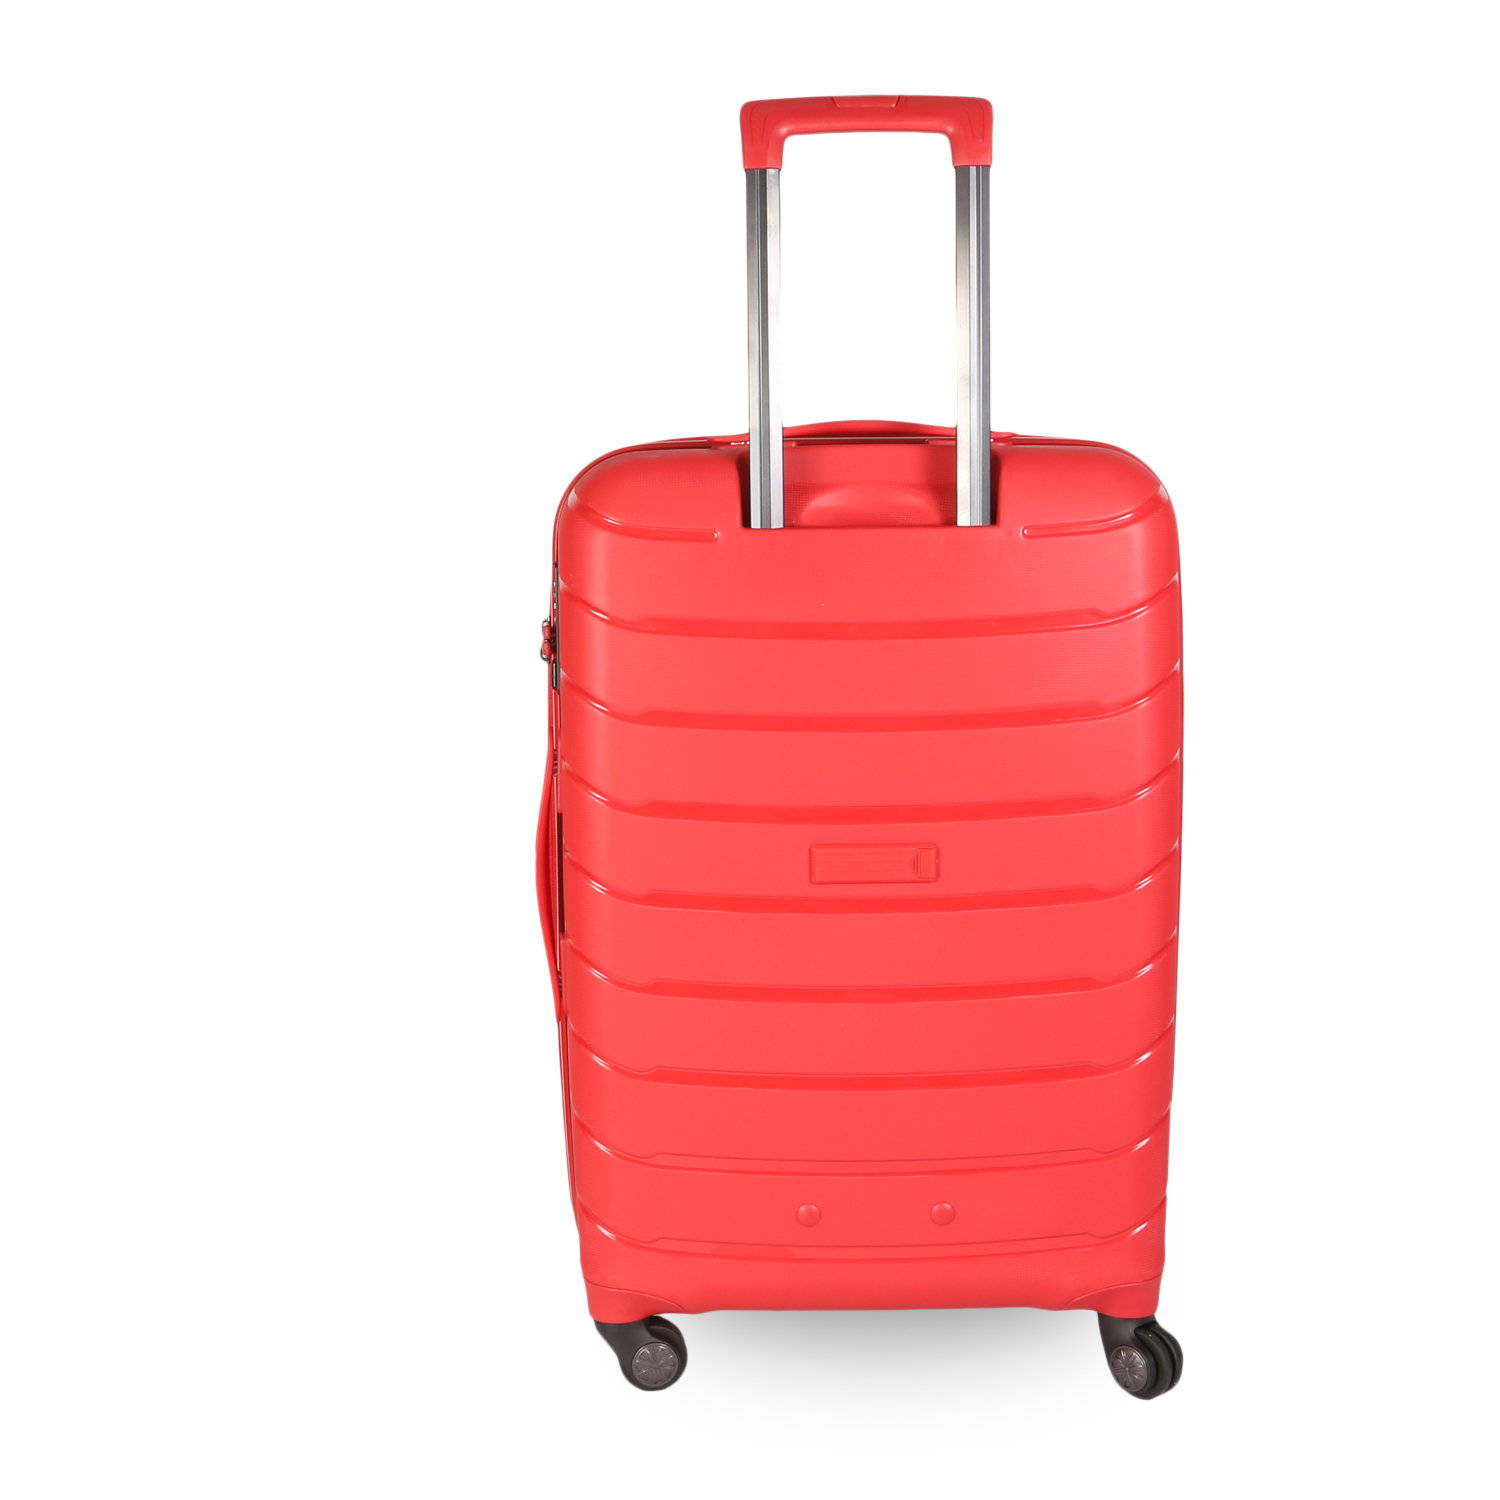 Buy Fly Featherlite Hardsided Polycarbonate Luggage Trolley Online ...